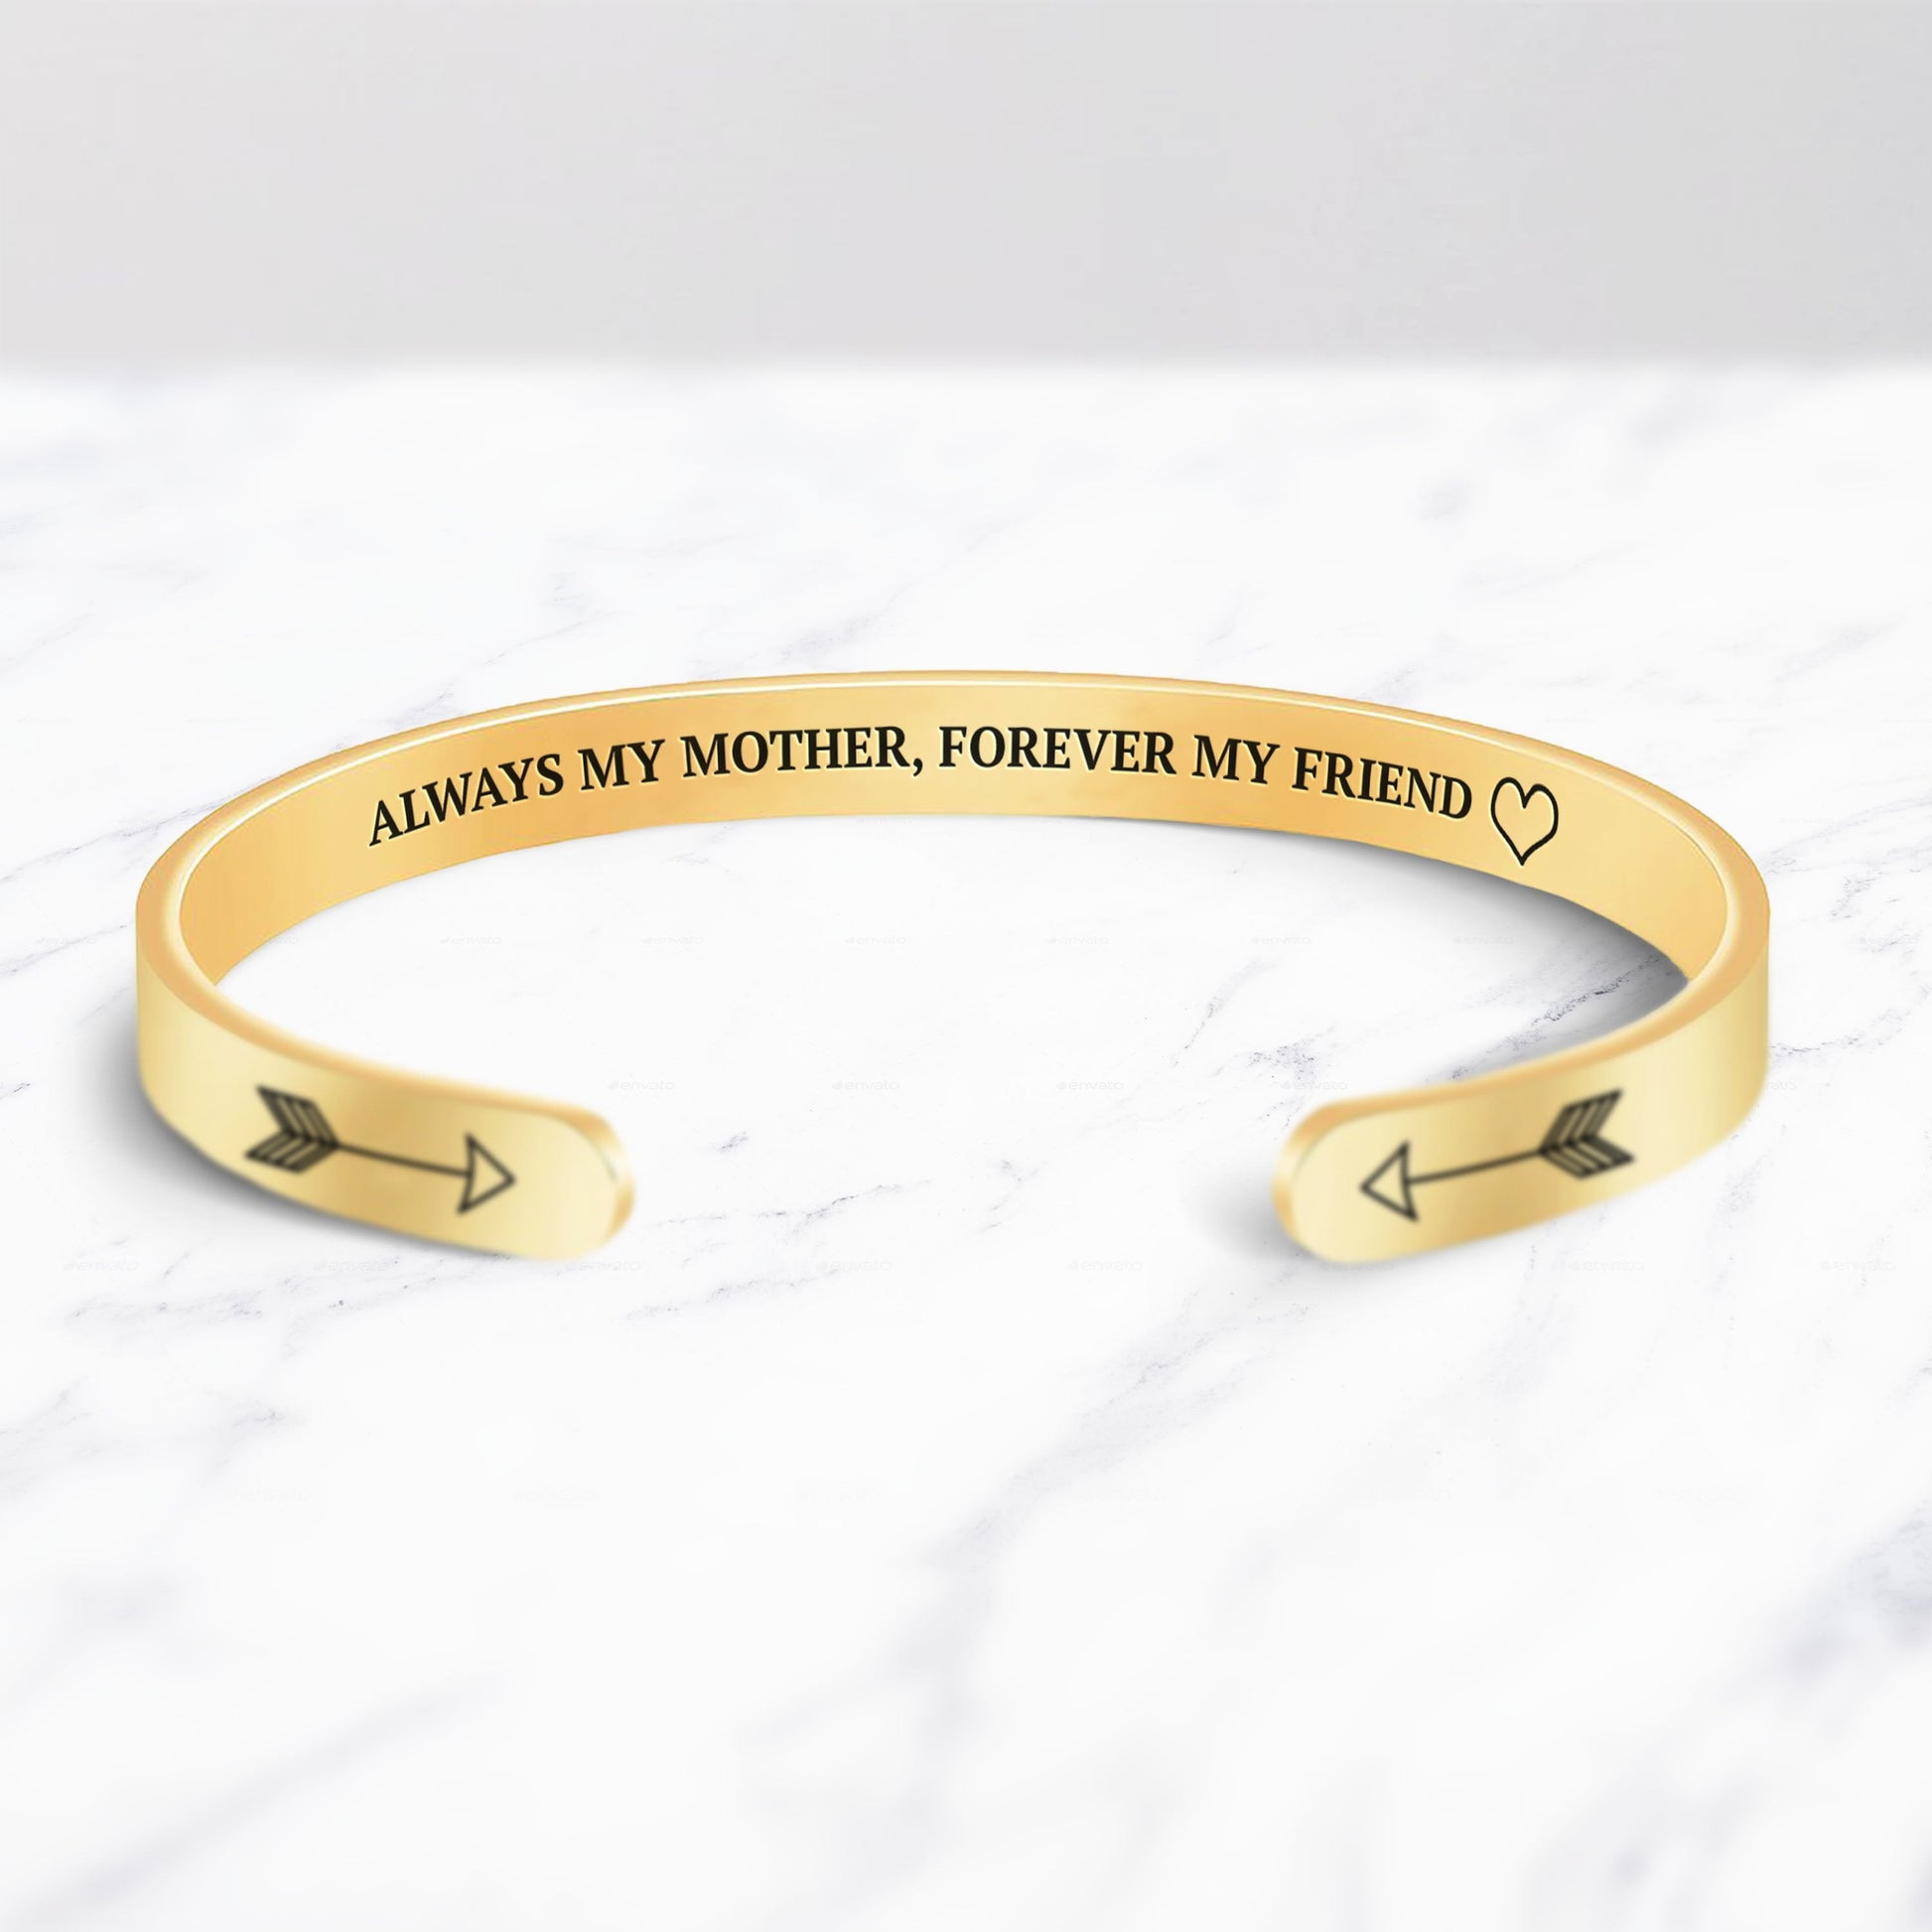 Always My Mother, Forever My Friend Cuff Bracelet bracelet with gold plating on a marble background